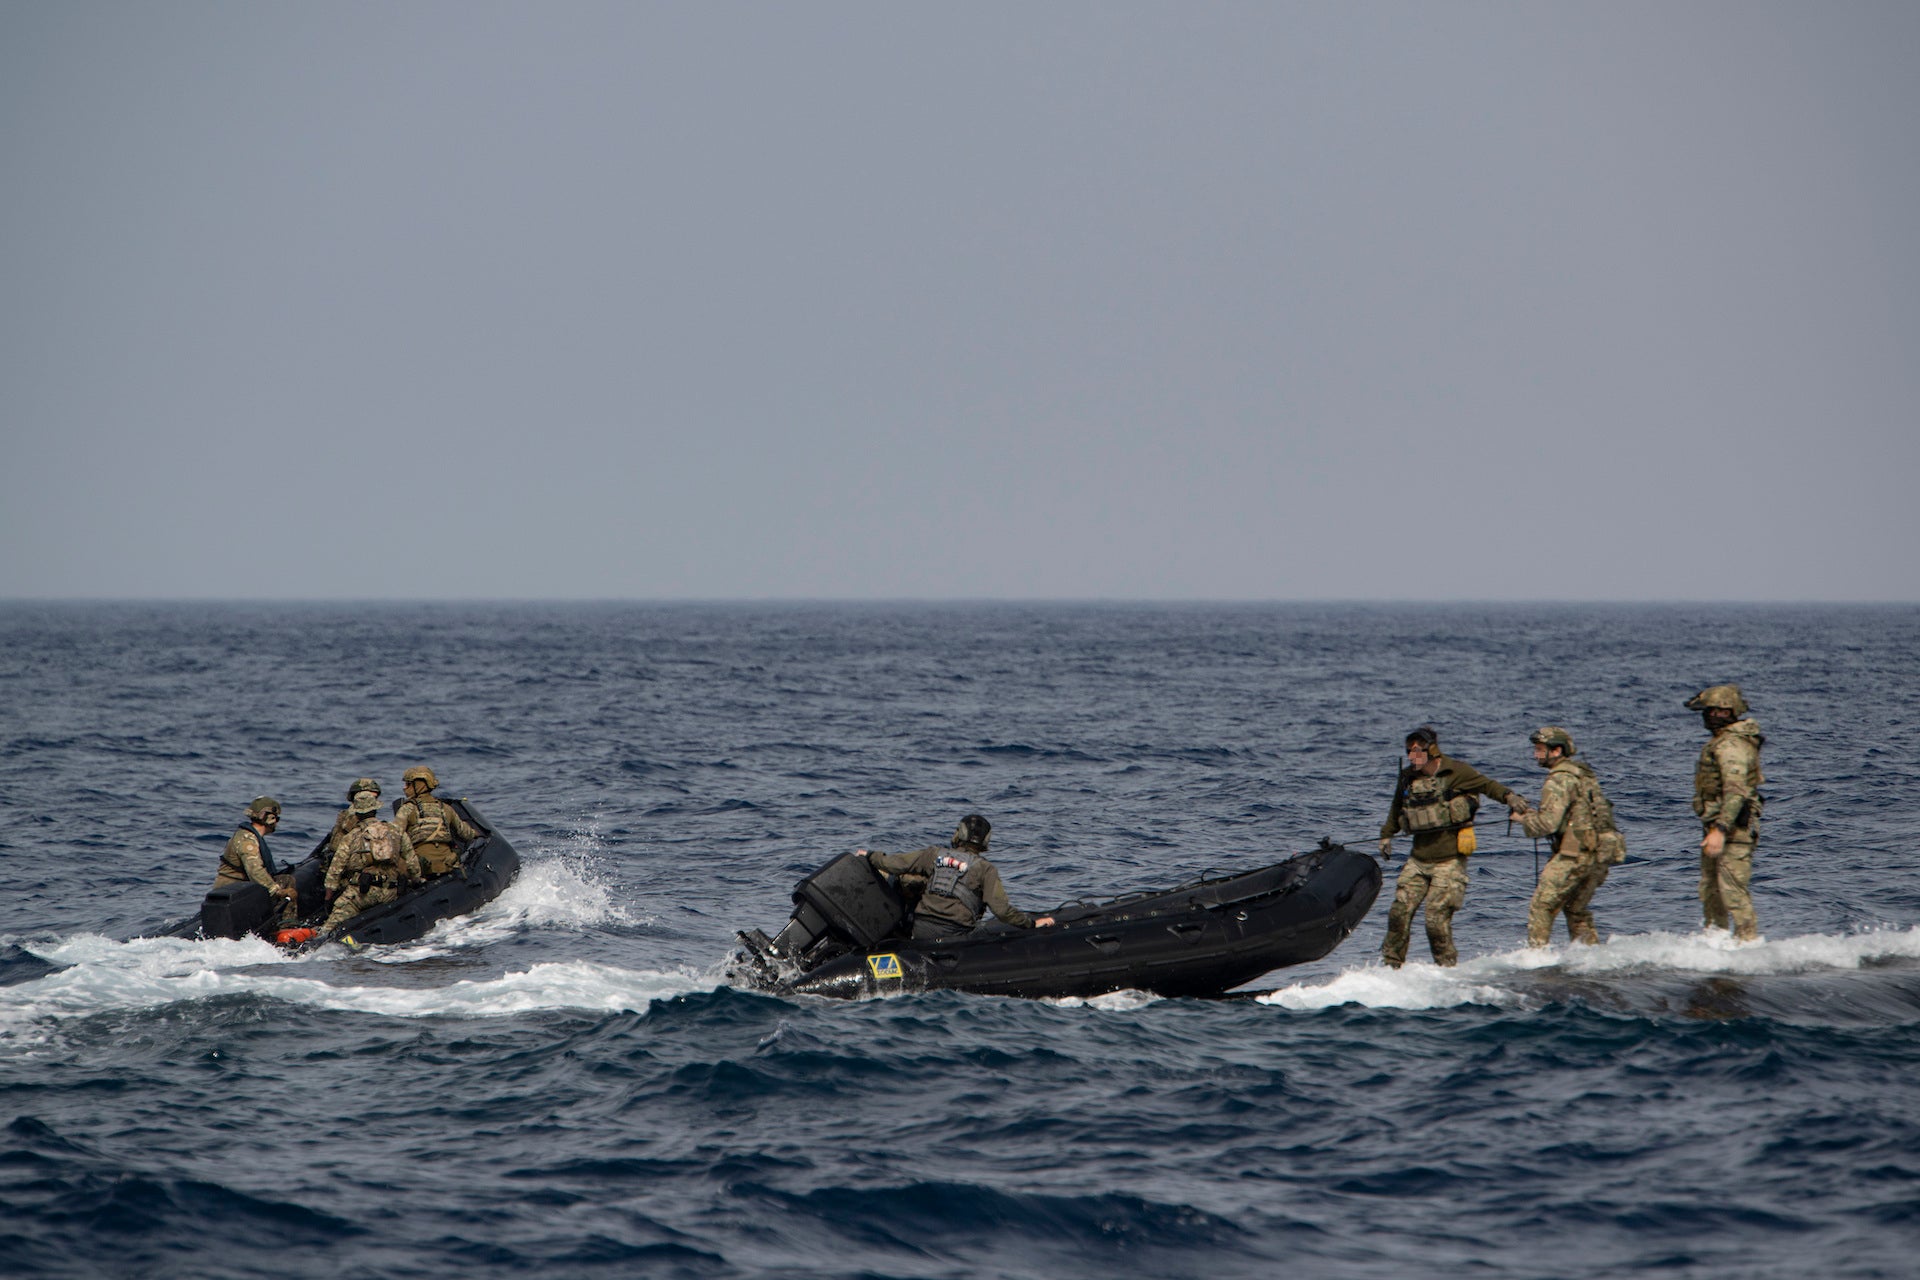 MEDITERRANEAN SEA (Feb. 27, 2023) East-Coast-based U.S. Naval Special Warfare Operators (SEALs) and NATO special operations forces partners land a combatant rubber raiding craft (CRRC) aboard Ohio-class guided-missile submarine USS Florida (SSGN 728) during a special operations forces interoperability exercise, Feb. 27, 2023. These  operations demonstrate U.S. European Command’s ability to rapidly deploy Special Operations Forces throughout the theater at a time and place of our choosing, and the U.S. commitment to train with Allies and partners to deploy and fight as multinational forces and SOF to meet today’s challenges. (U.S. Navy photo by Mass Communications Specialist 2nd Class Matthew Dickinson)